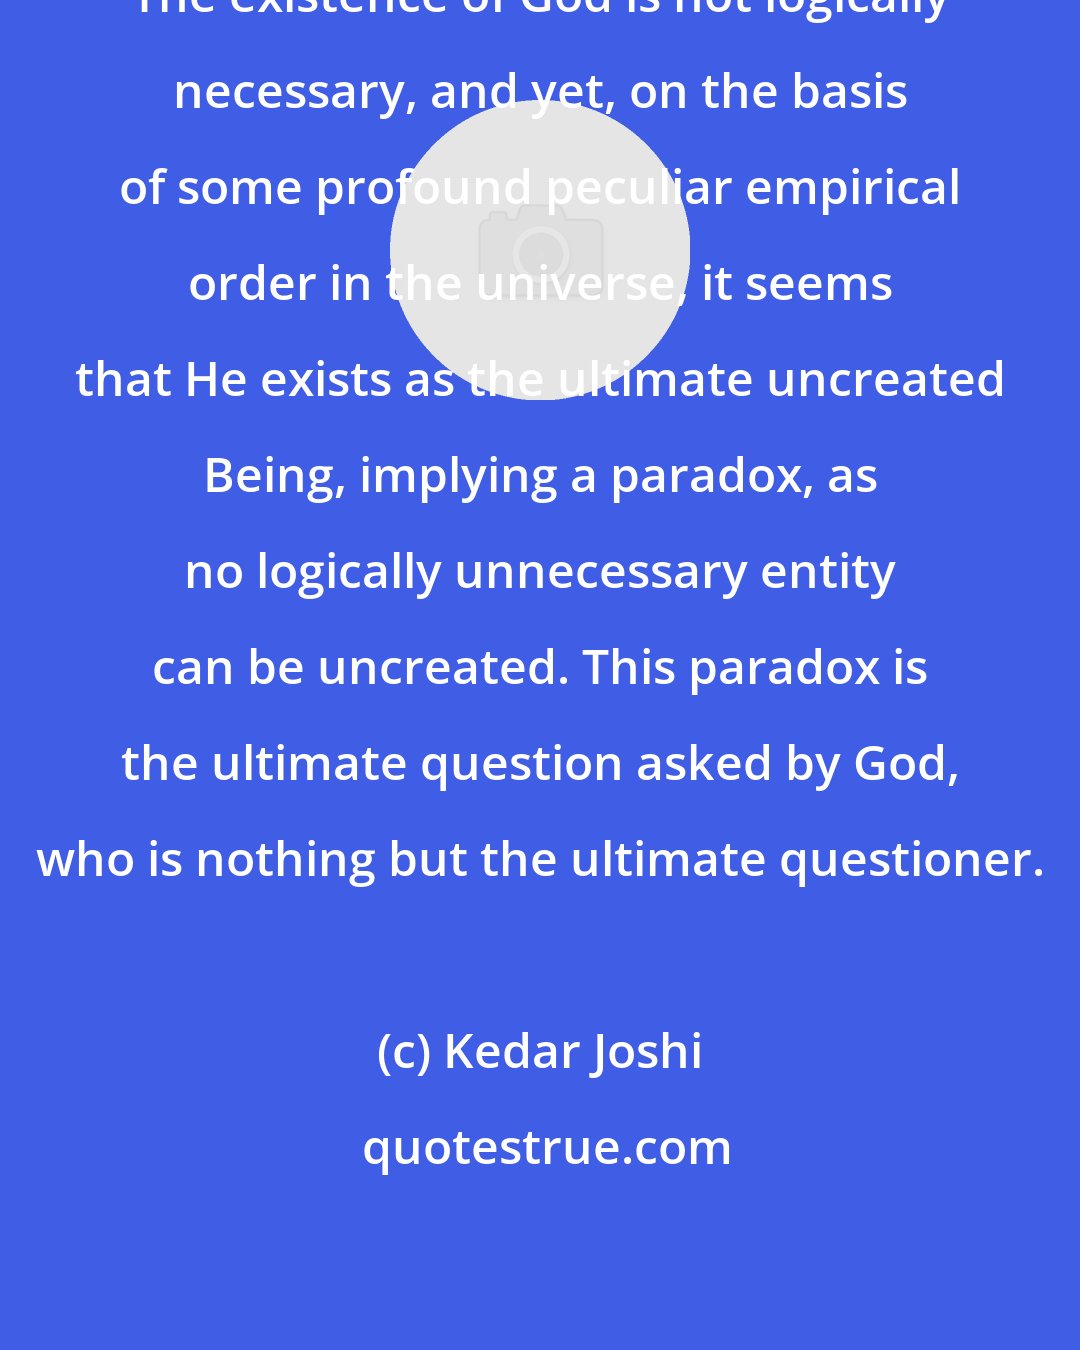 Kedar Joshi: The existence of God is not logically necessary, and yet, on the basis of some profound peculiar empirical order in the universe, it seems that He exists as the ultimate uncreated Being, implying a paradox, as no logically unnecessary entity can be uncreated. This paradox is the ultimate question asked by God, who is nothing but the ultimate questioner.